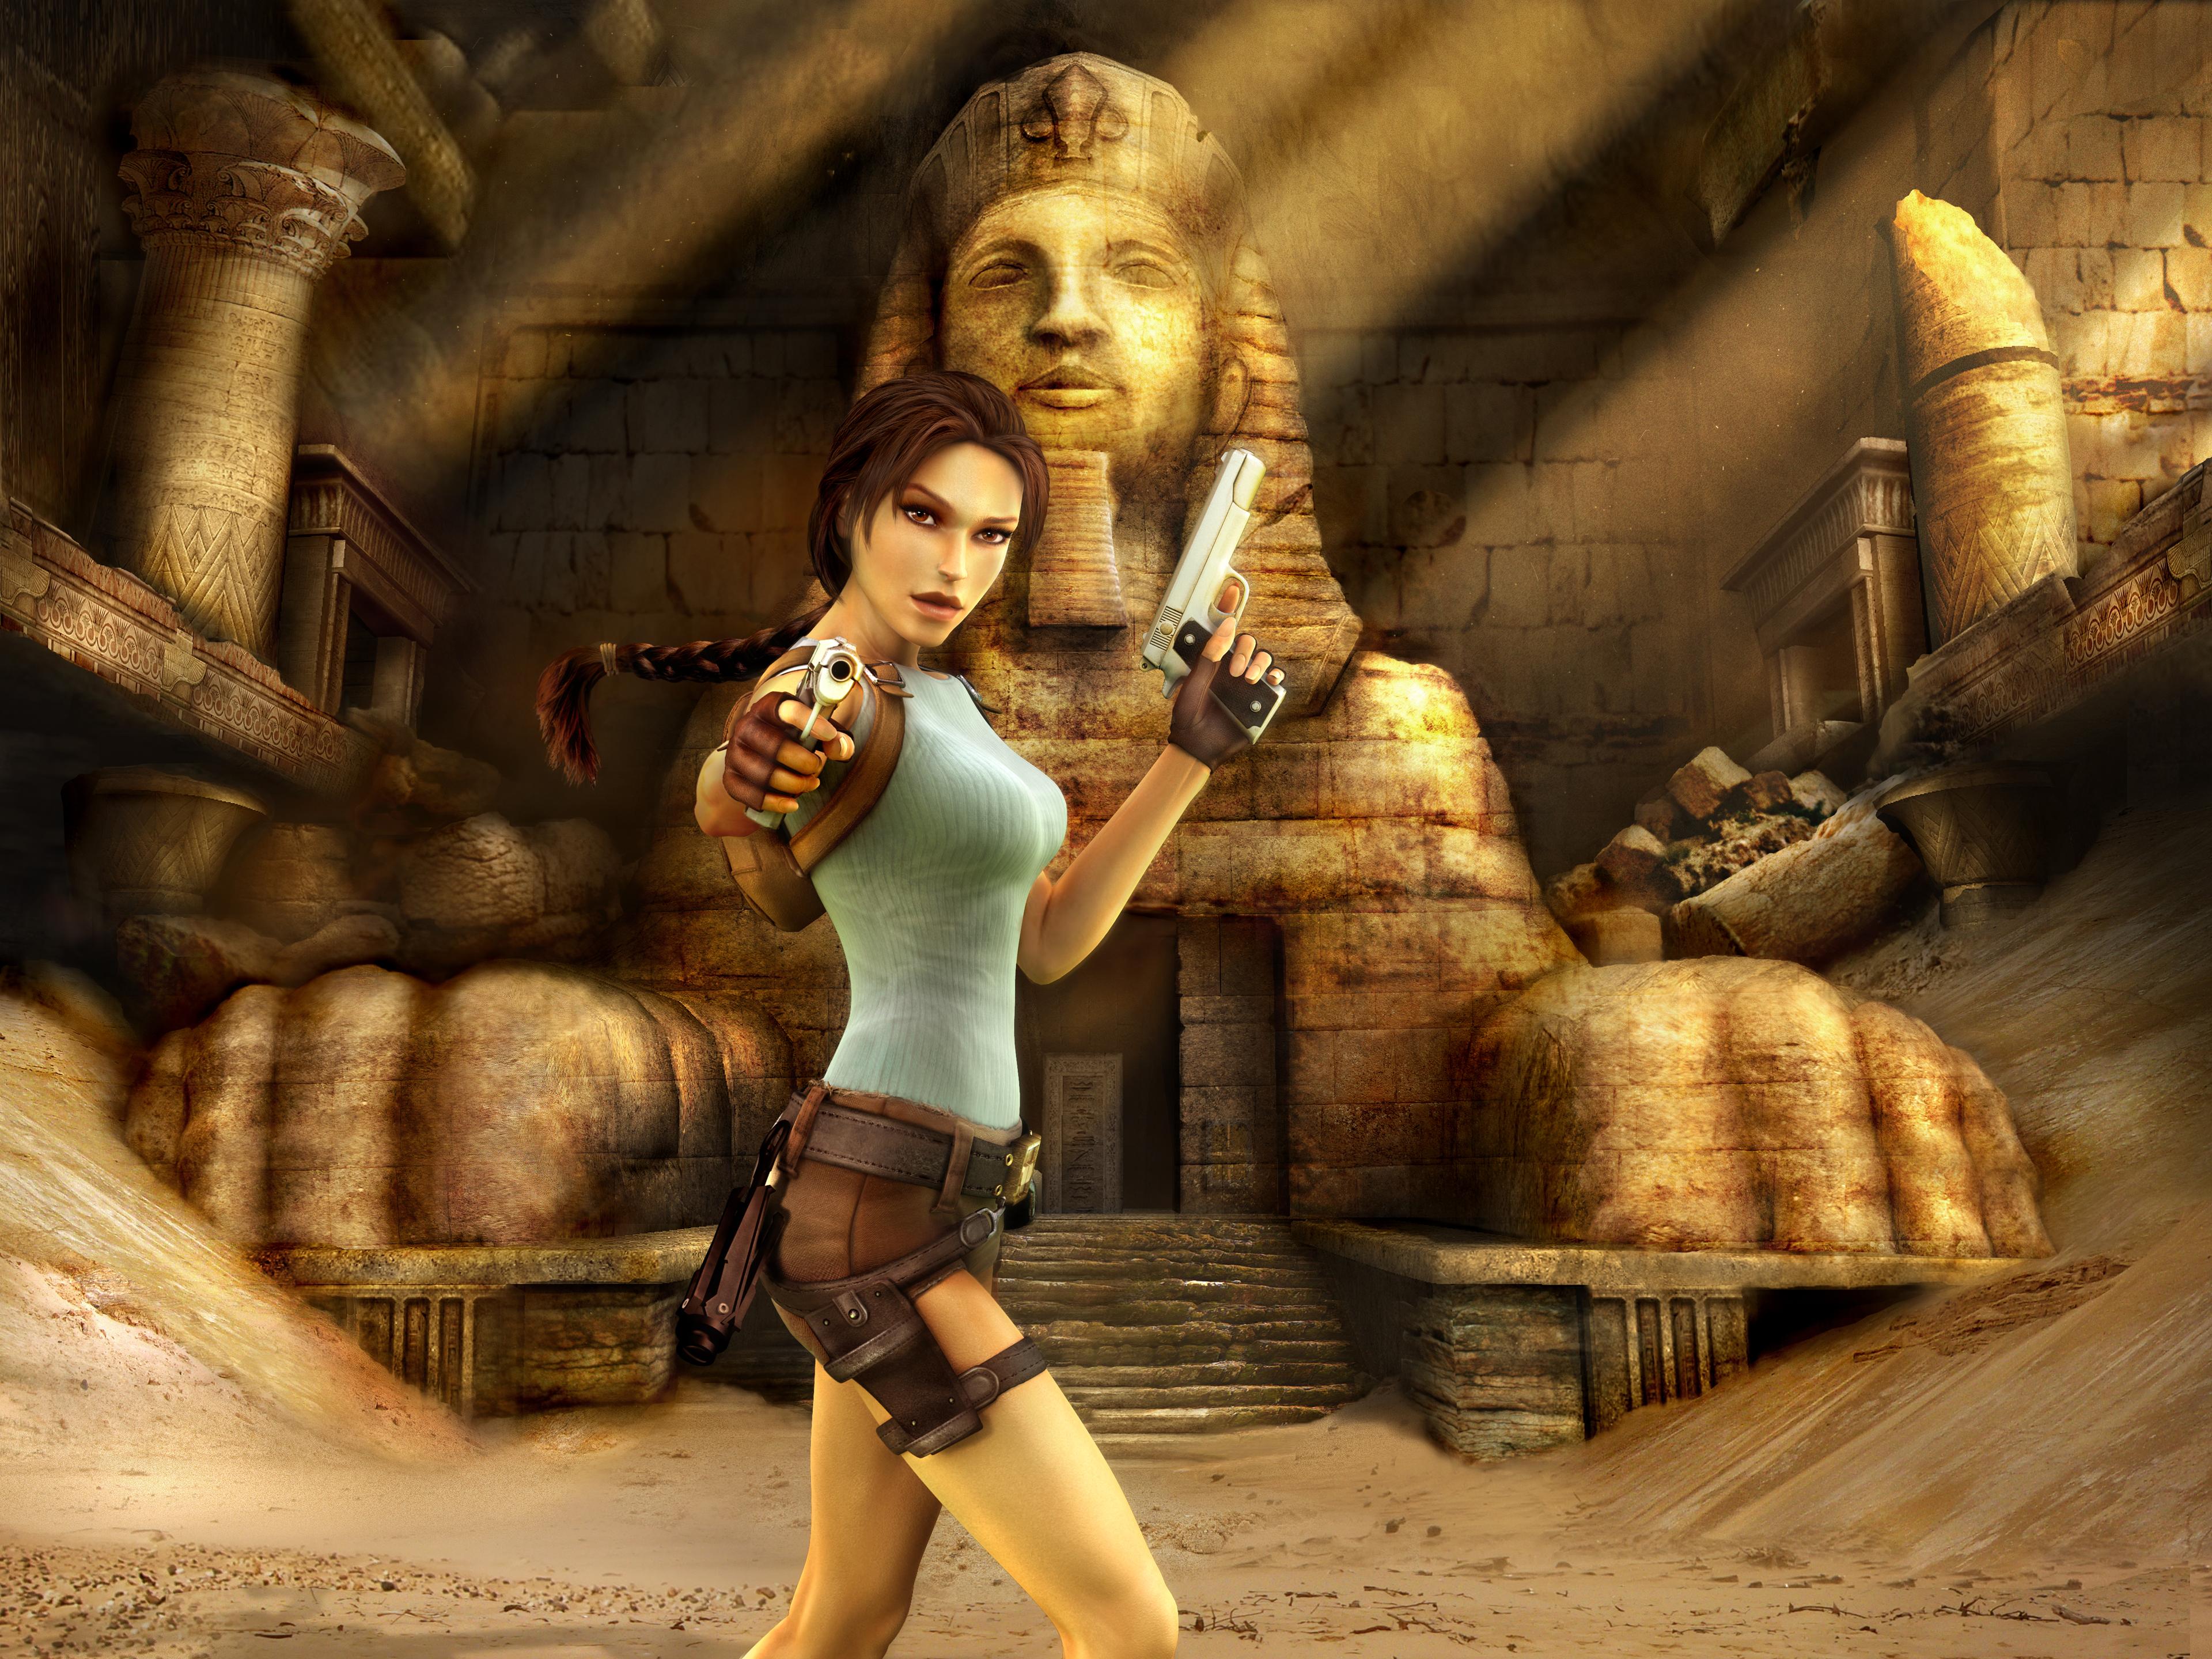 A dramatic artwork of Lara Croft in an ancient Egyptian setting, wielding dual pistols with a giant sphinx statue in the background.